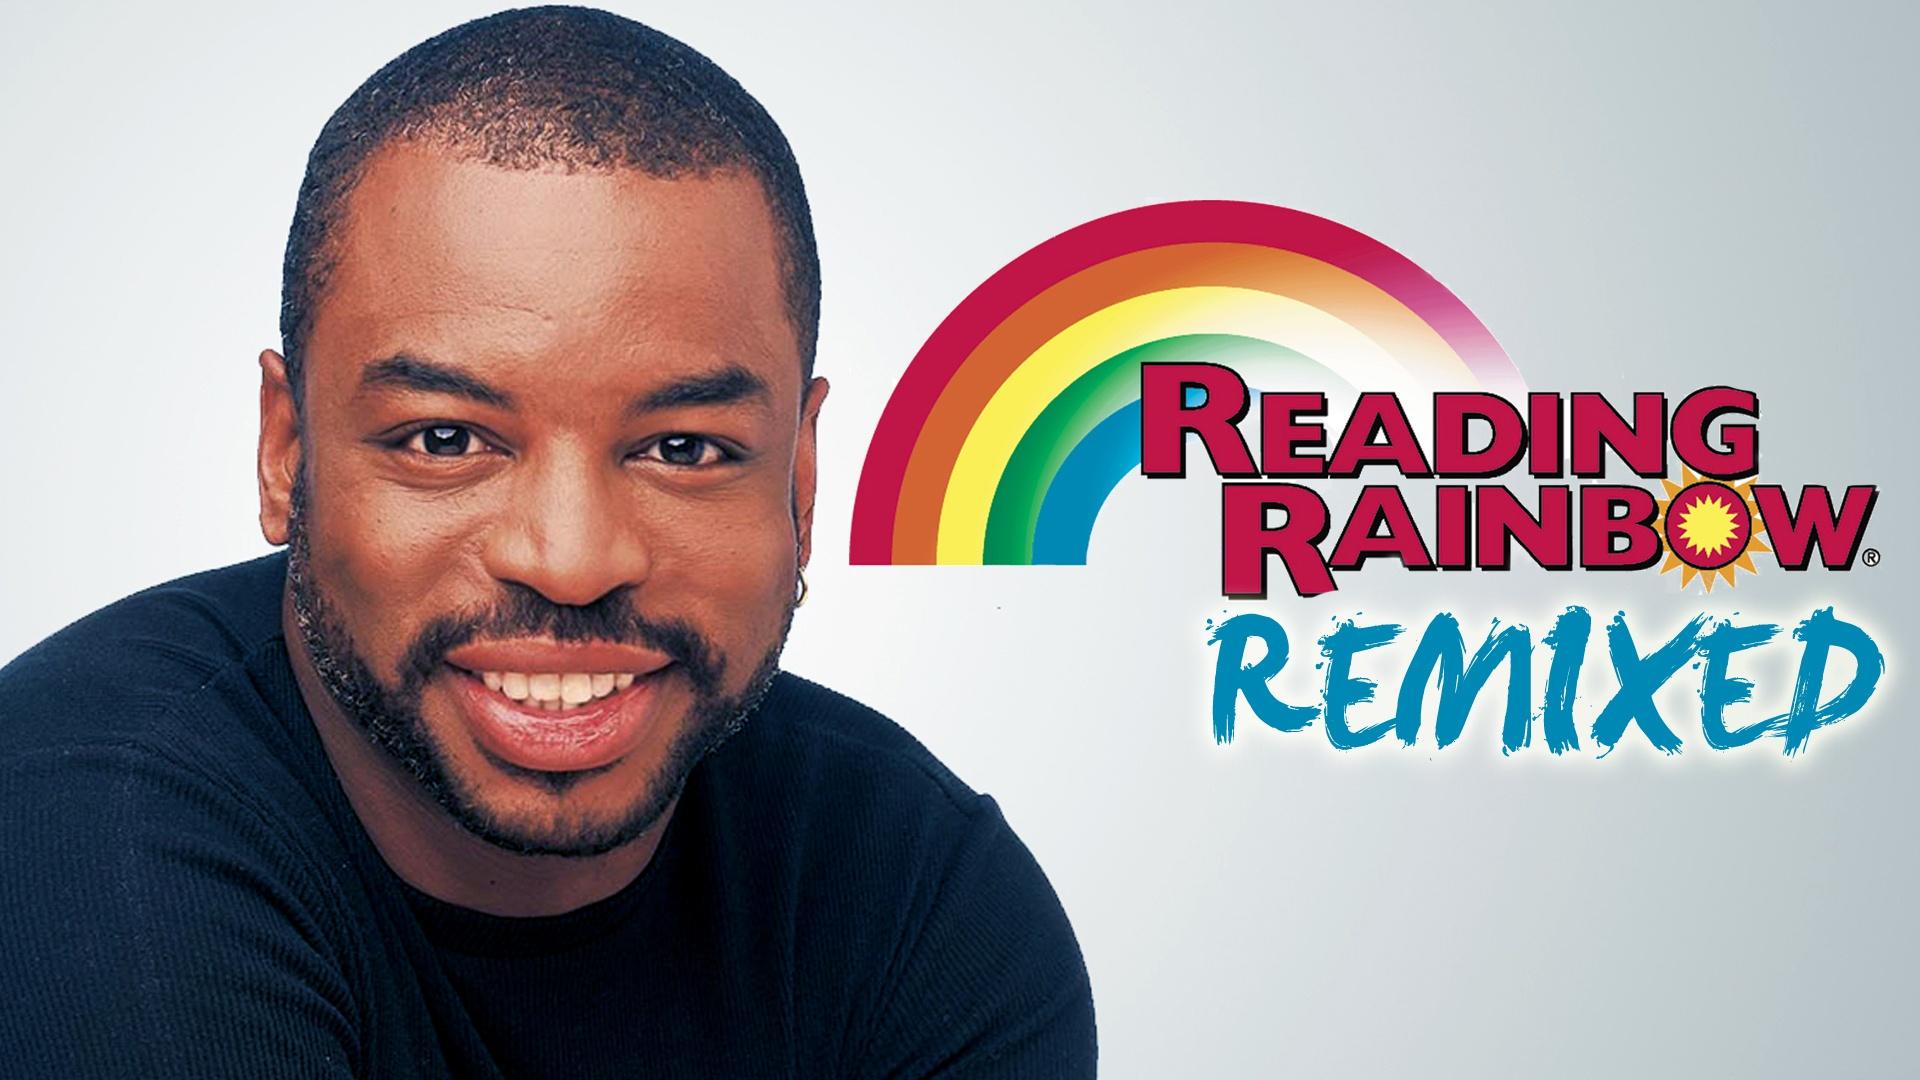 Reading Rainbow Remixed "In Your Imagination" PBS Remixed PBS